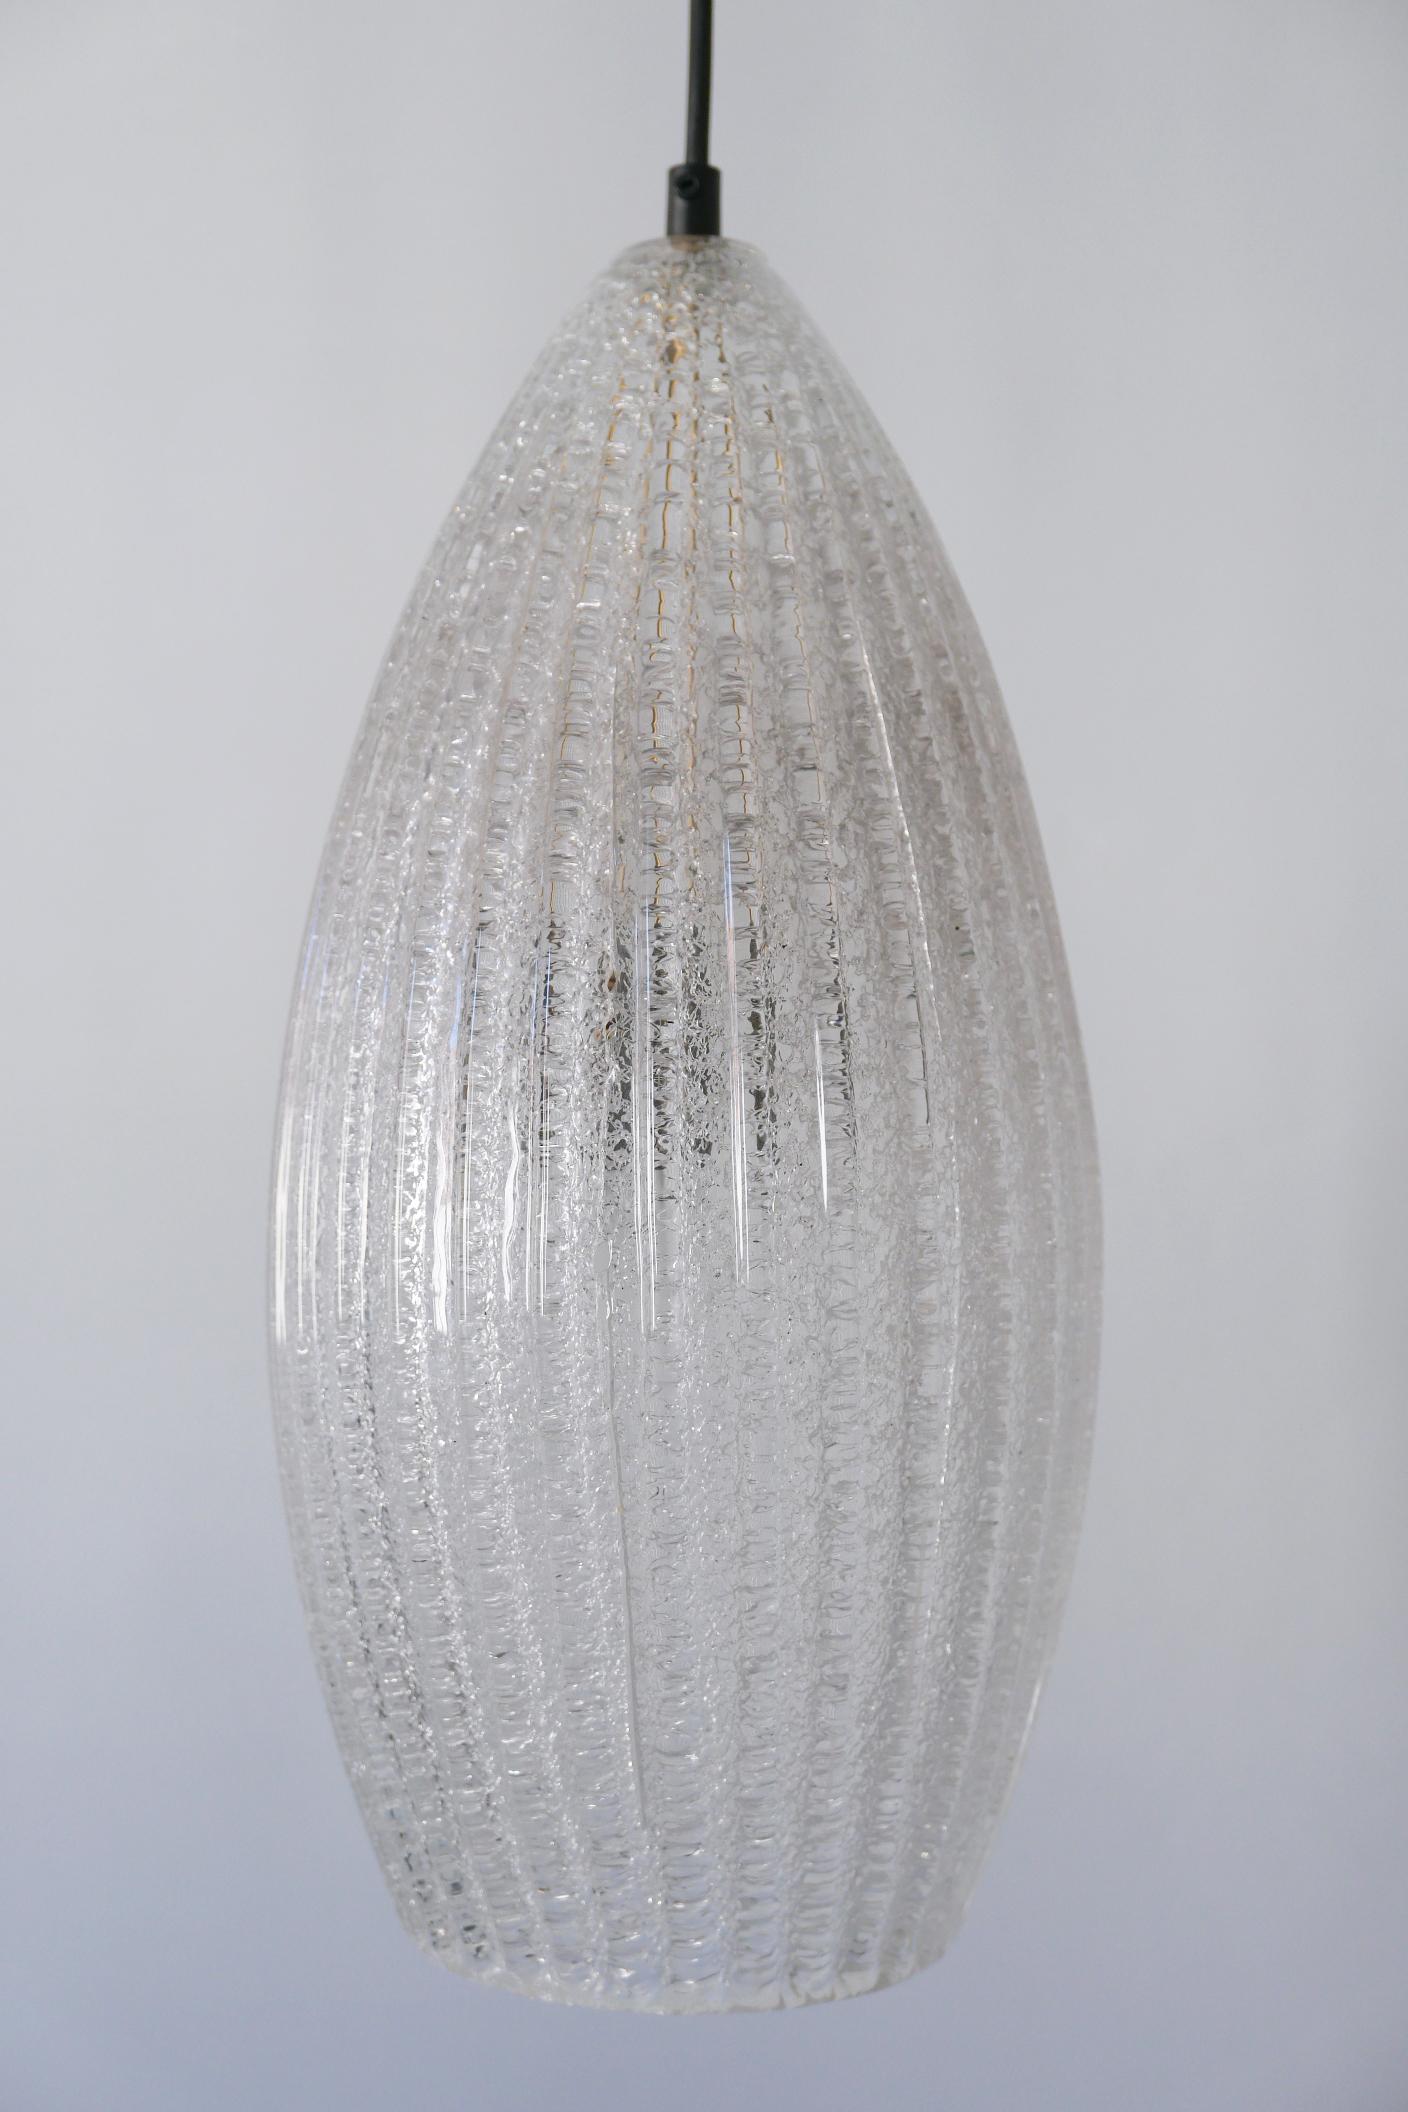 Set of Two Mid-Century Modern Textured Glass Pendant Lamps, 1960s, Germany For Sale 2